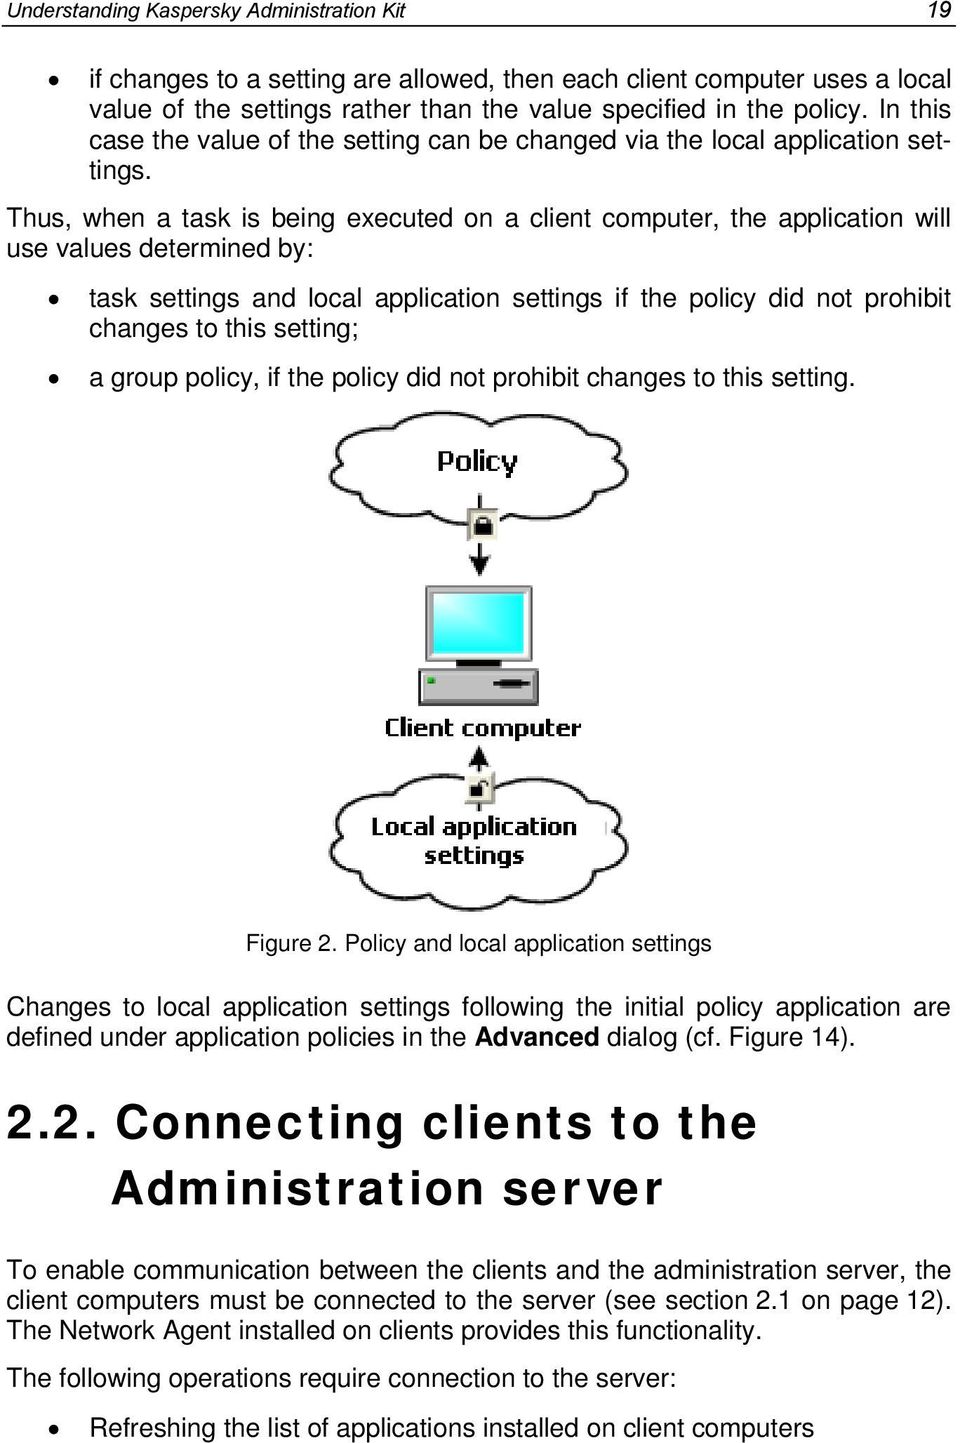 Thus, when a task is being executed on a client computer, the application will use values determined by: task settings and local application settings if the policy did not prohibit changes to this